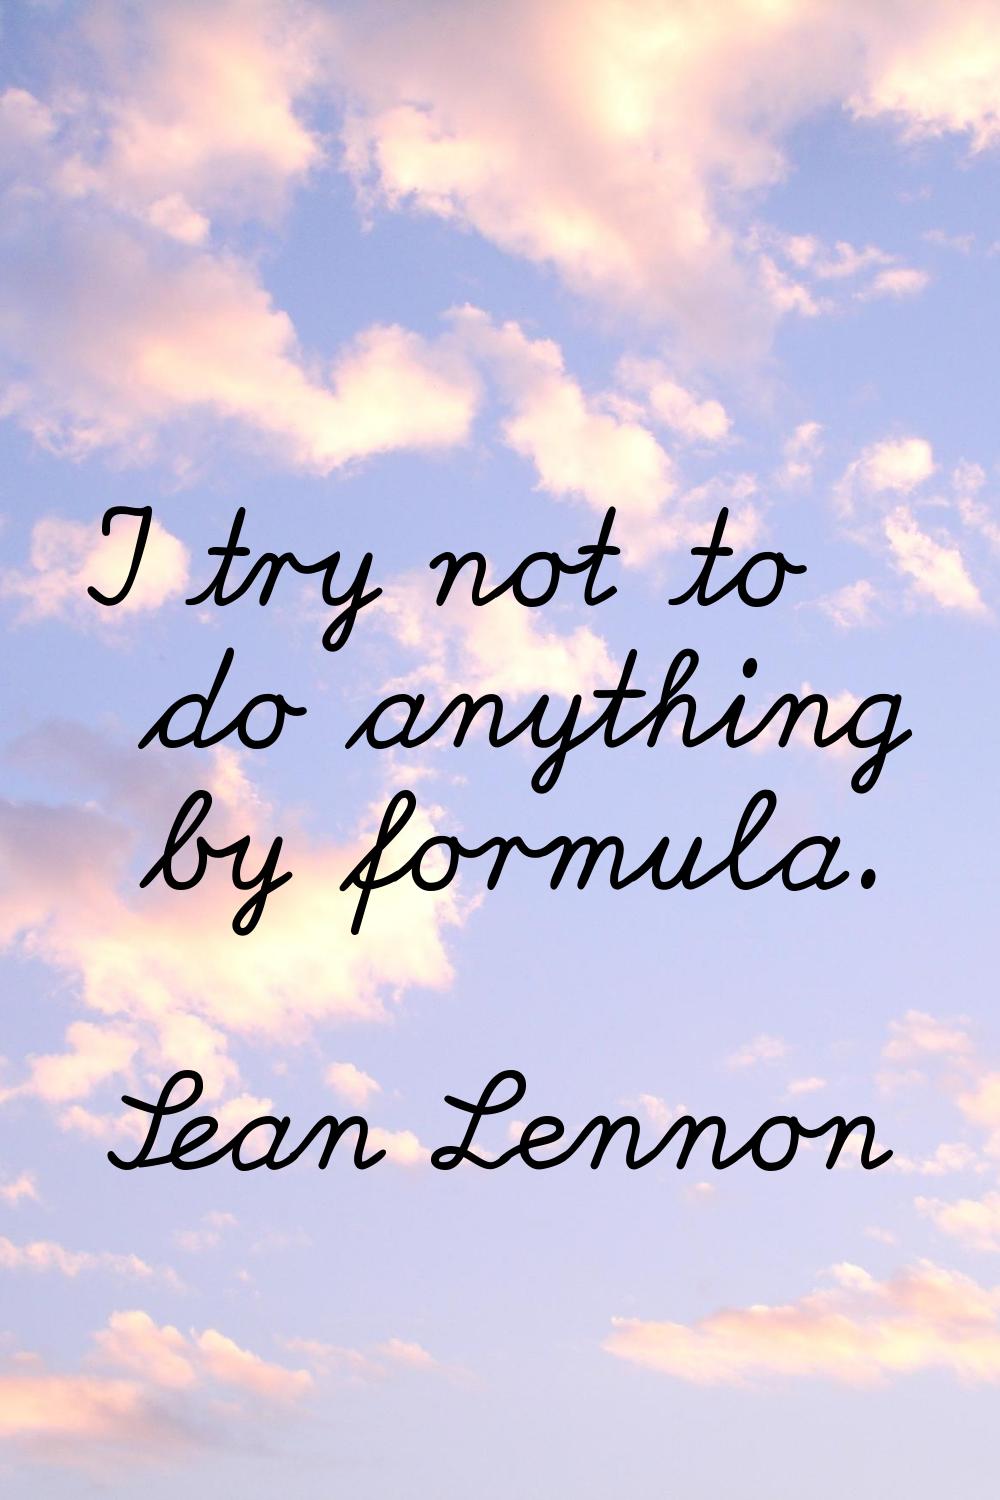 I try not to do anything by formula.